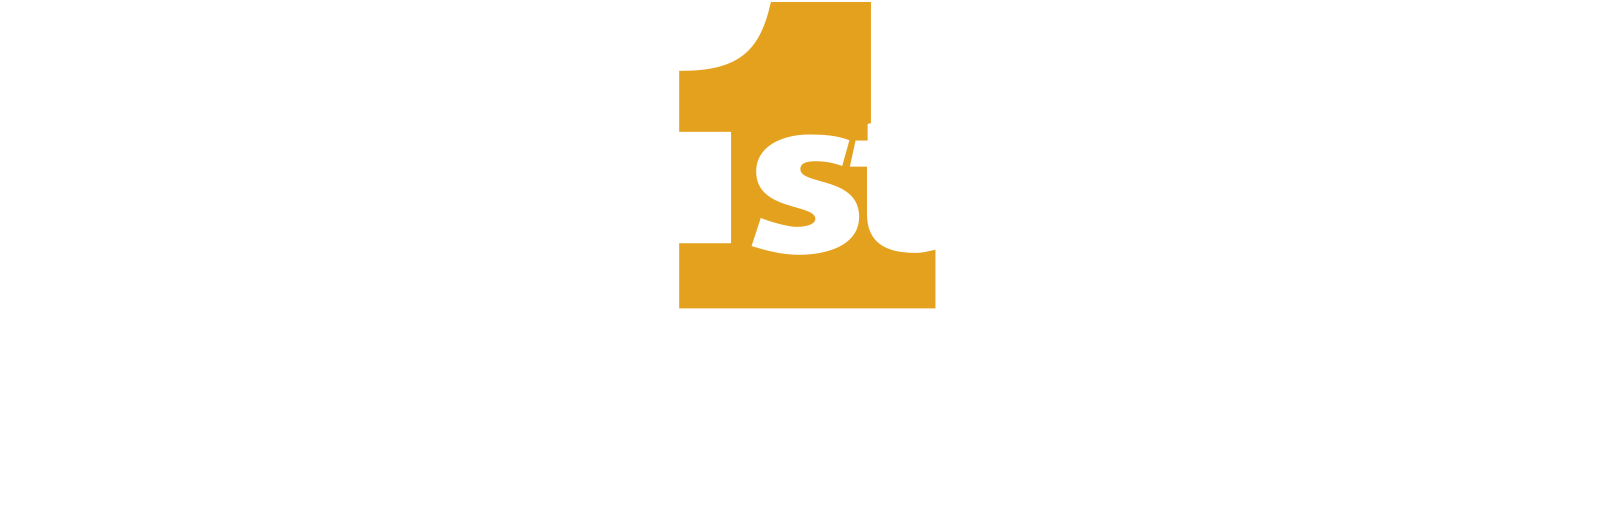 2019 First Community Bank